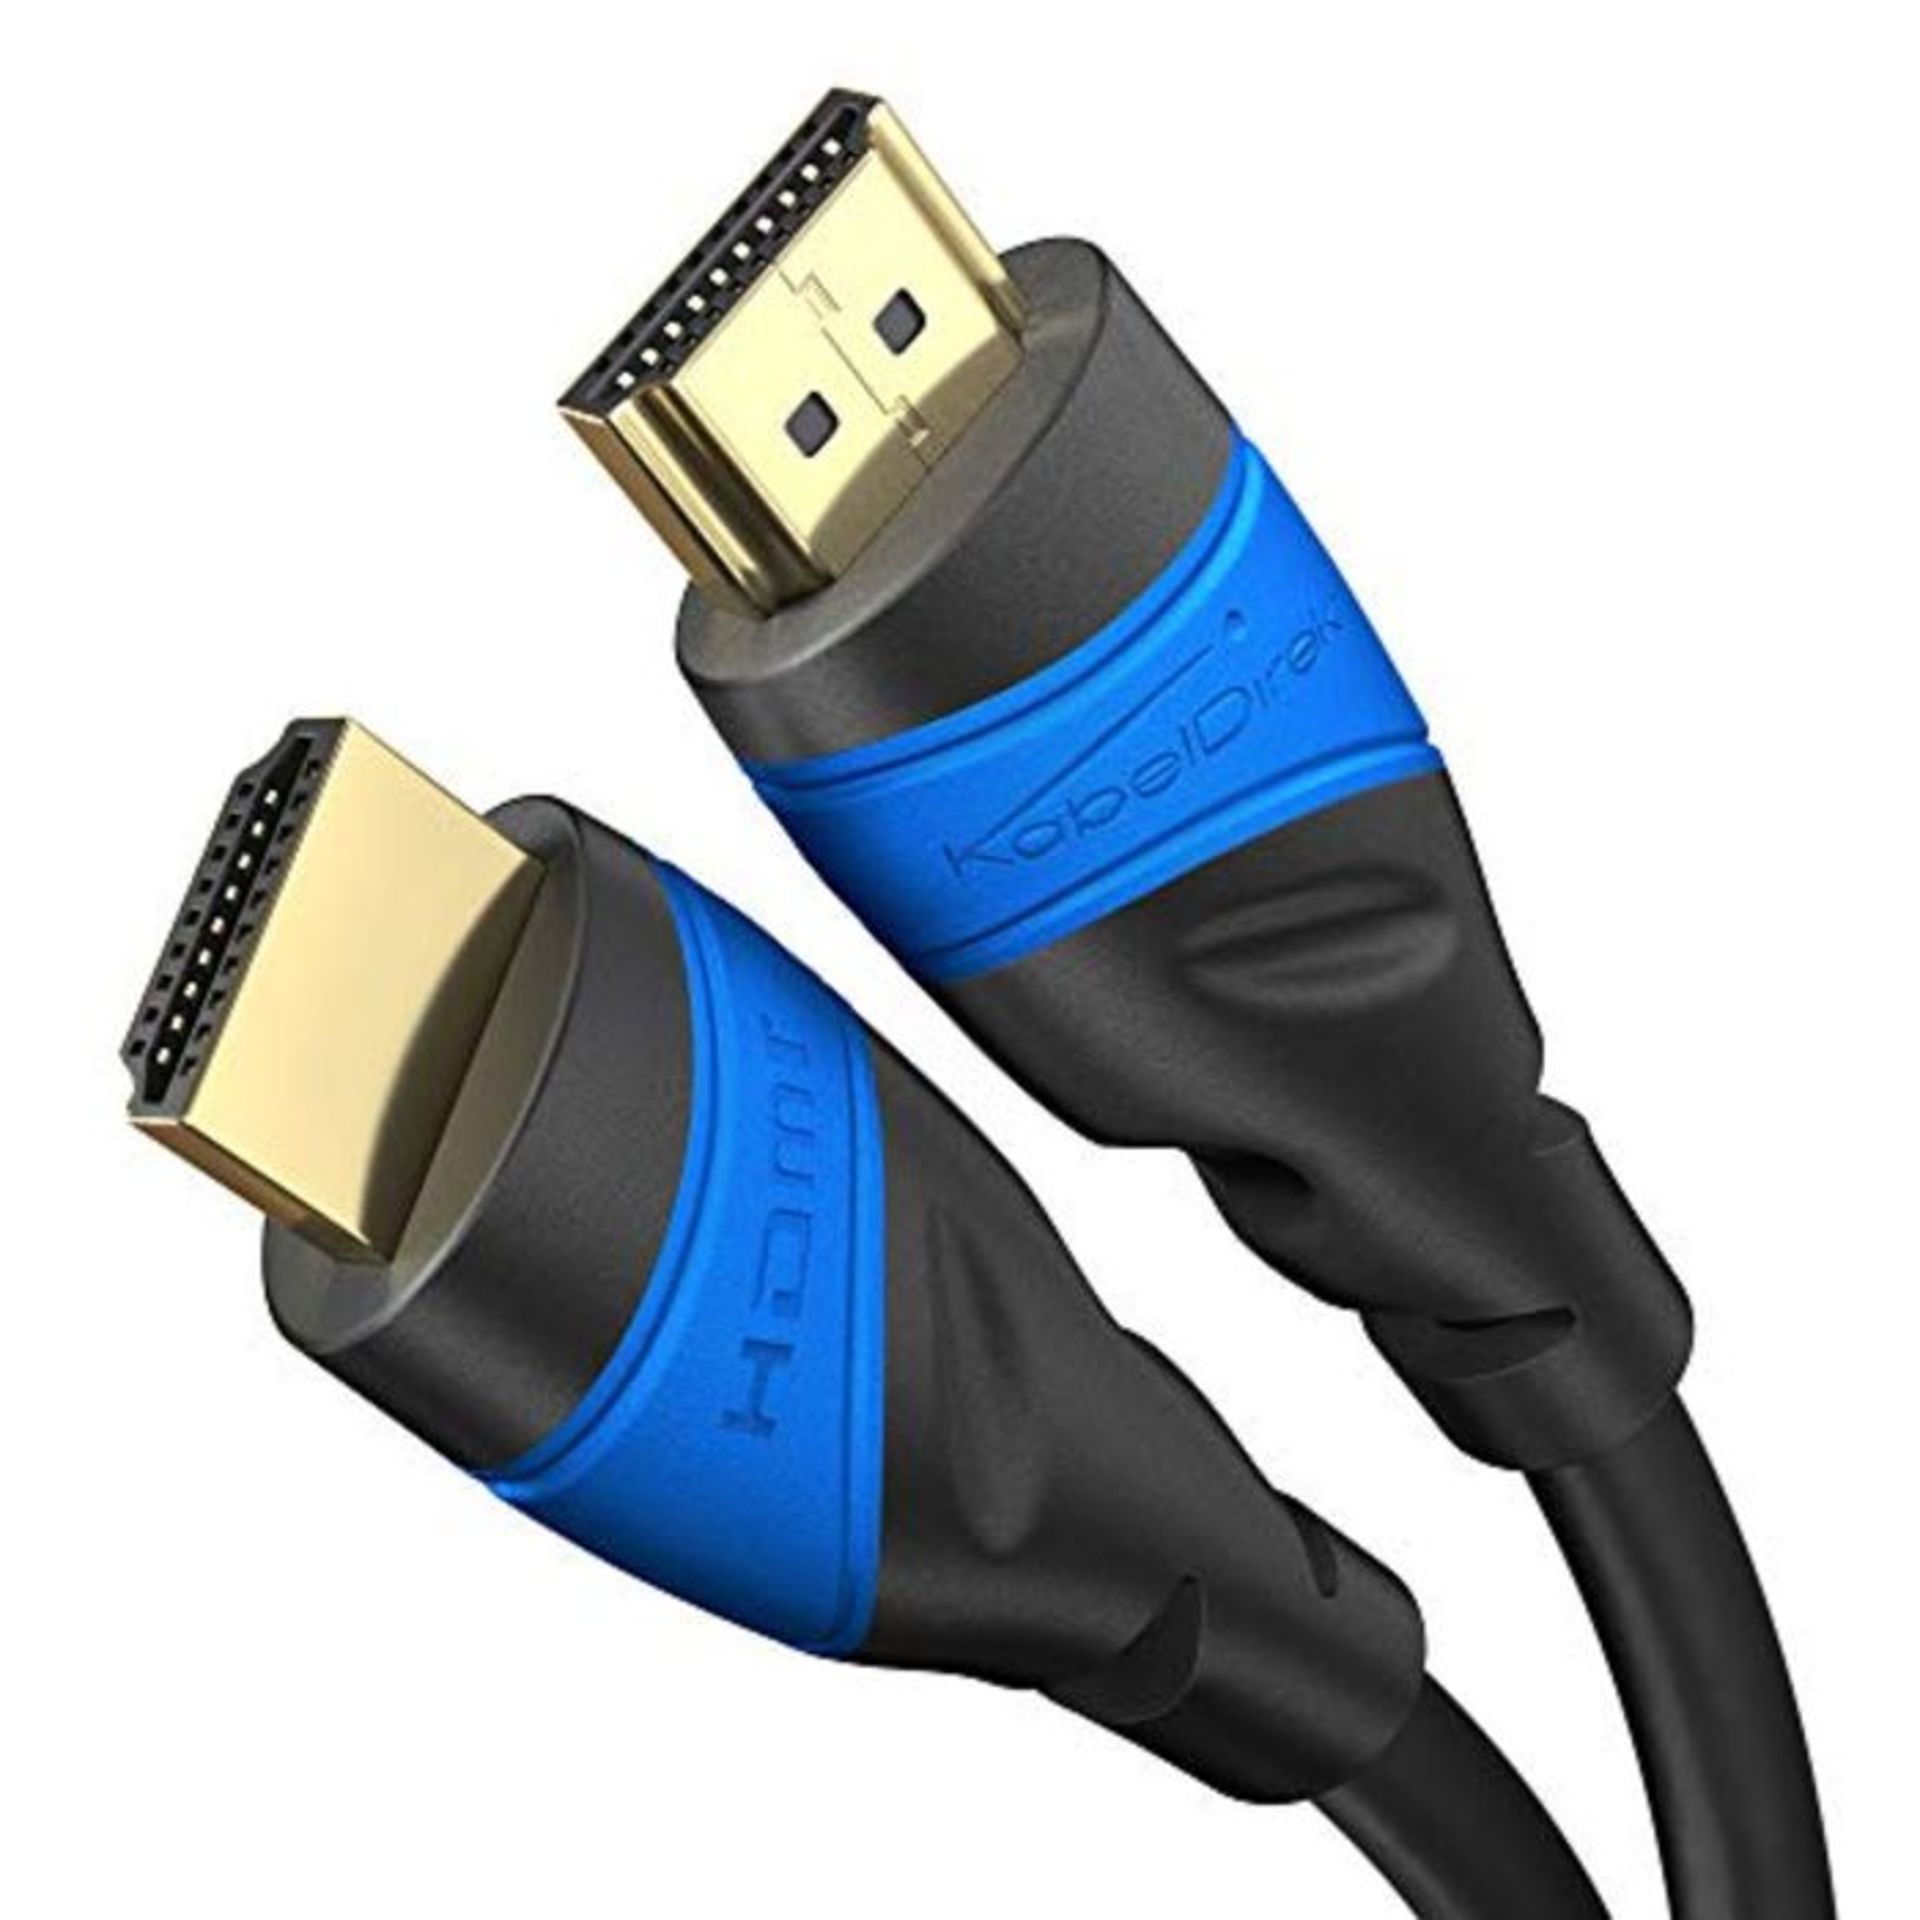 KabelDirekt - 20m HDMI cable - 4K HDMI cord (HDMI to HDMI - 4K@60Hz for stunning Ultra